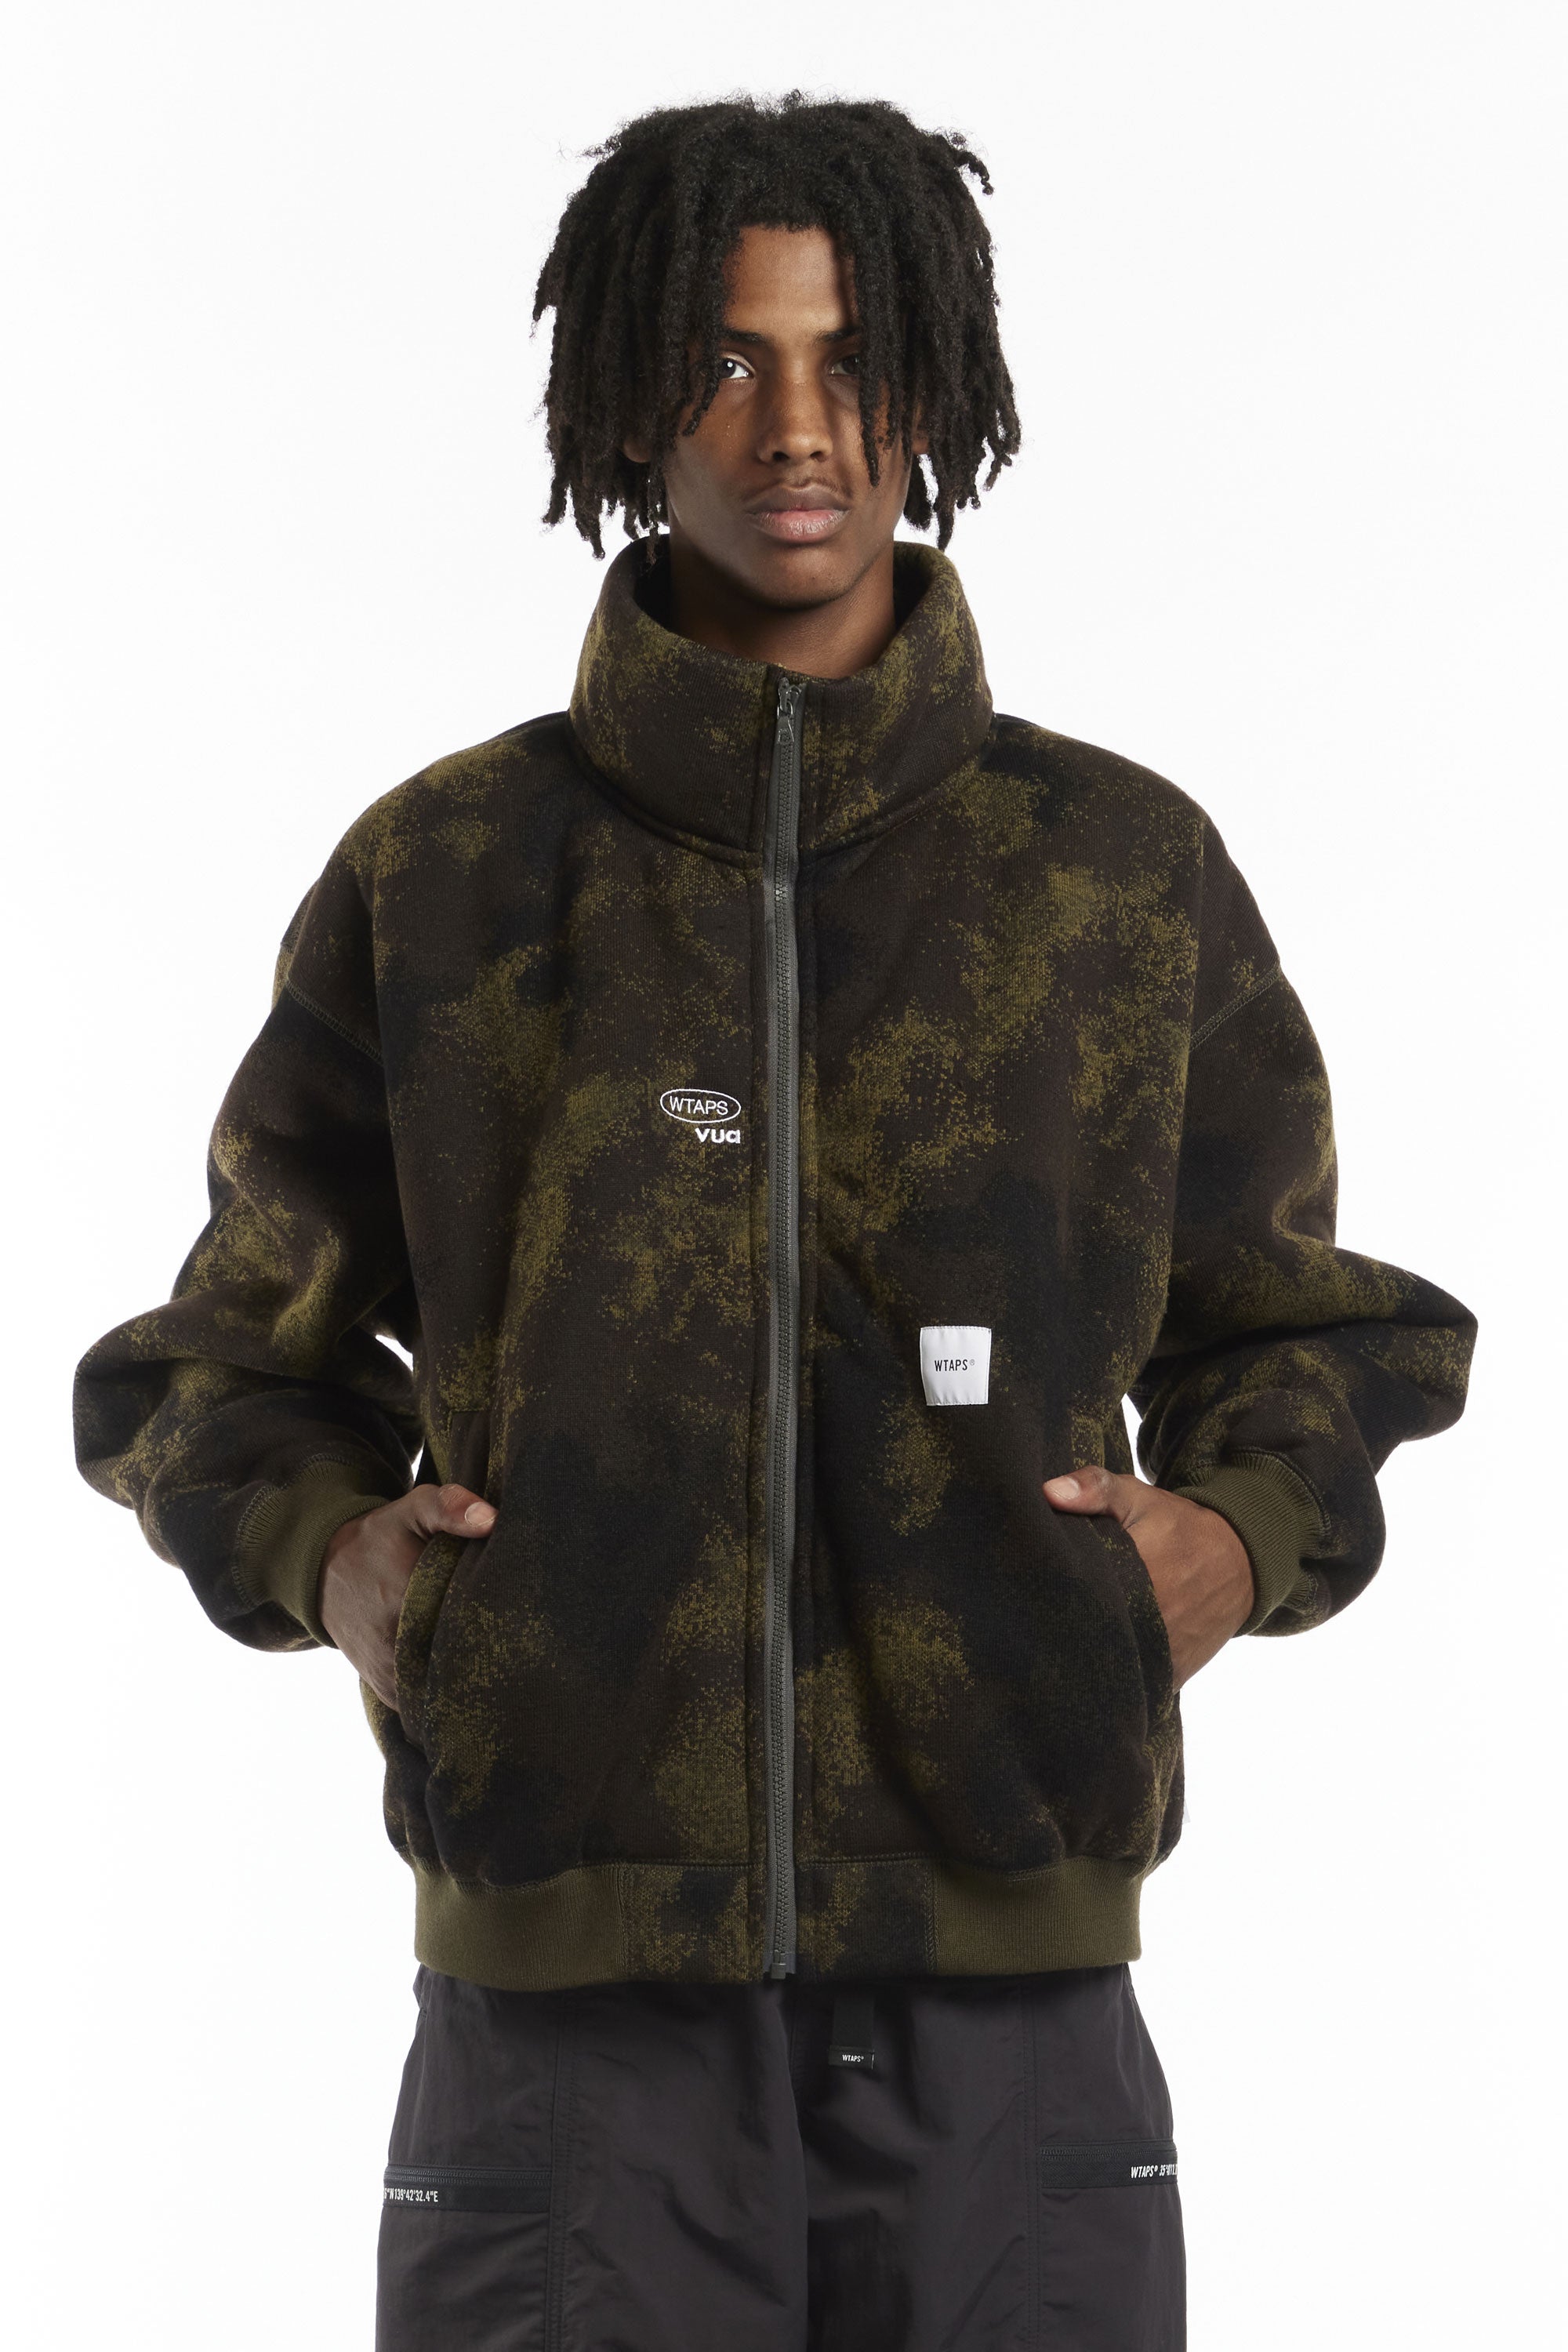 The WTAPS - BUNDLE BOA FLEECE JACKET OLIVE DRAB available online with global shipping, and in PAM Stores Melbourne and Sydney.